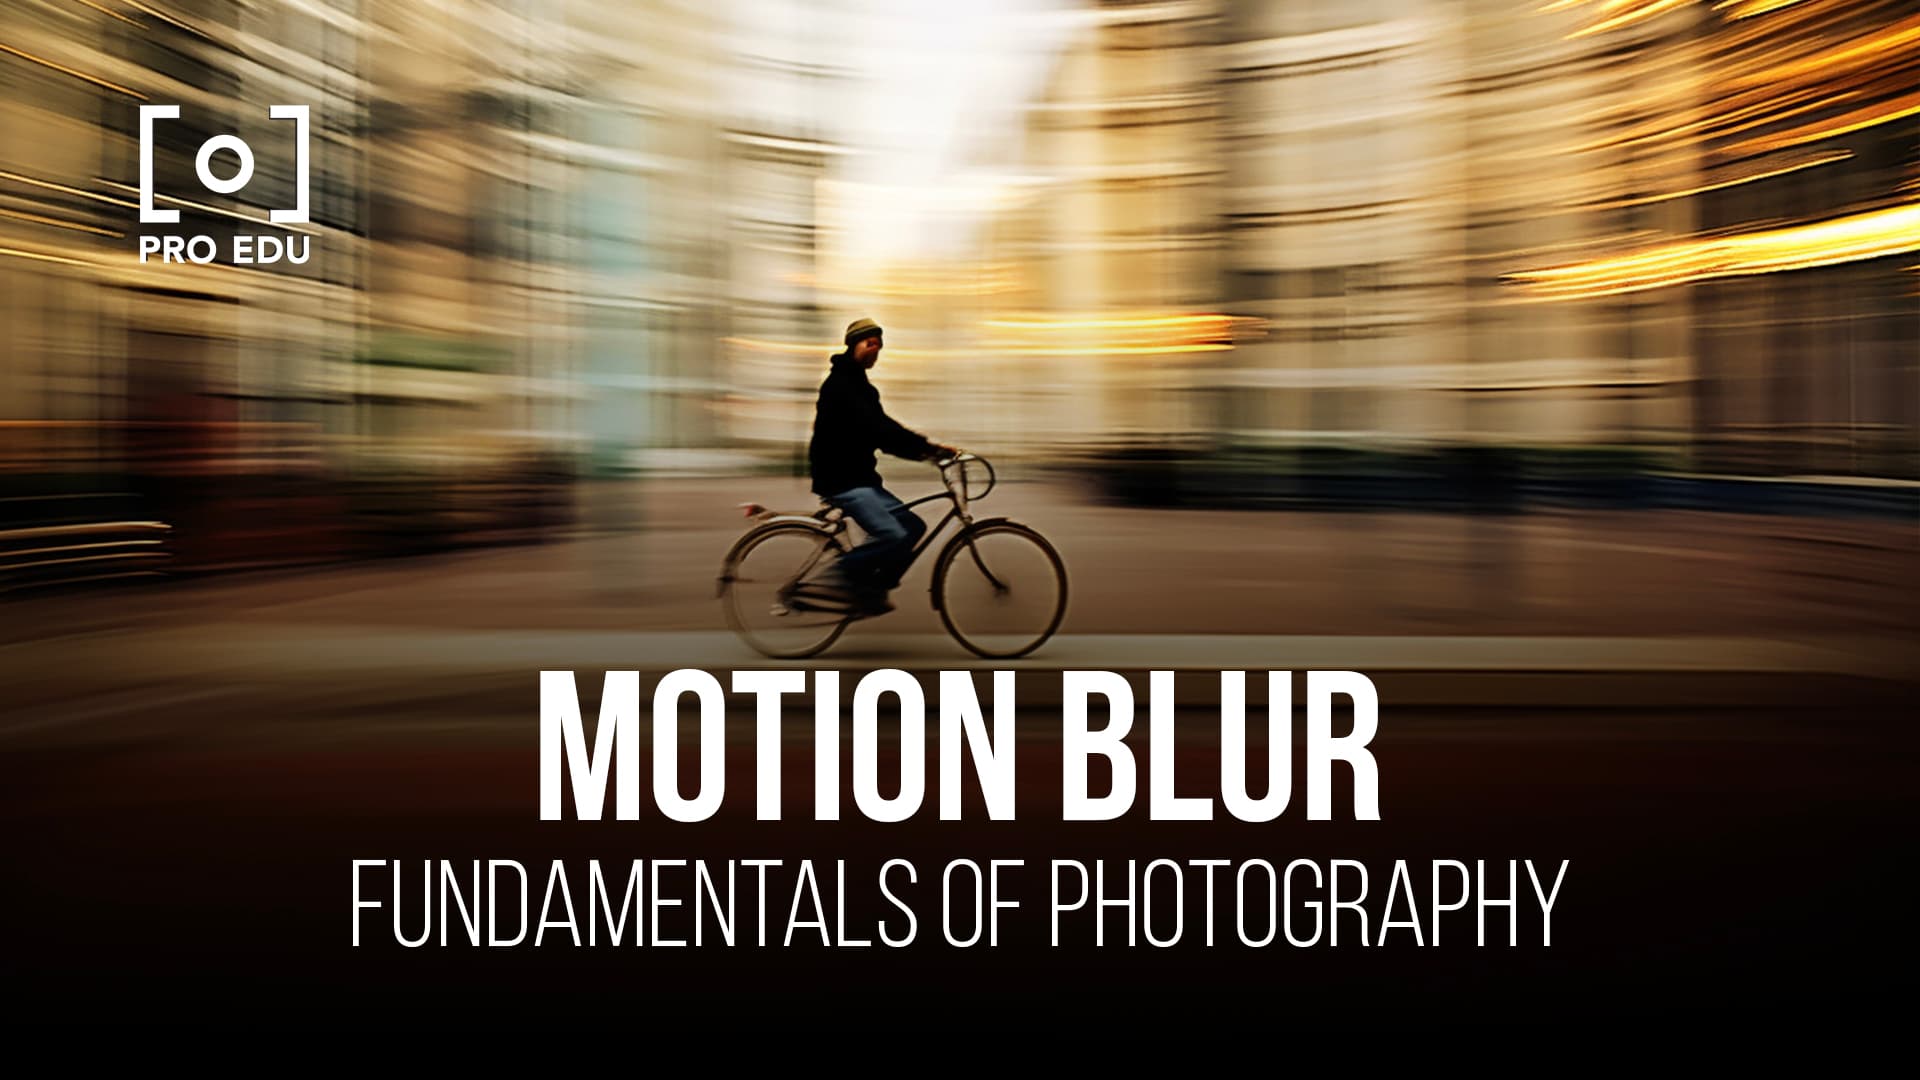 Create Movement With the Blur Tool